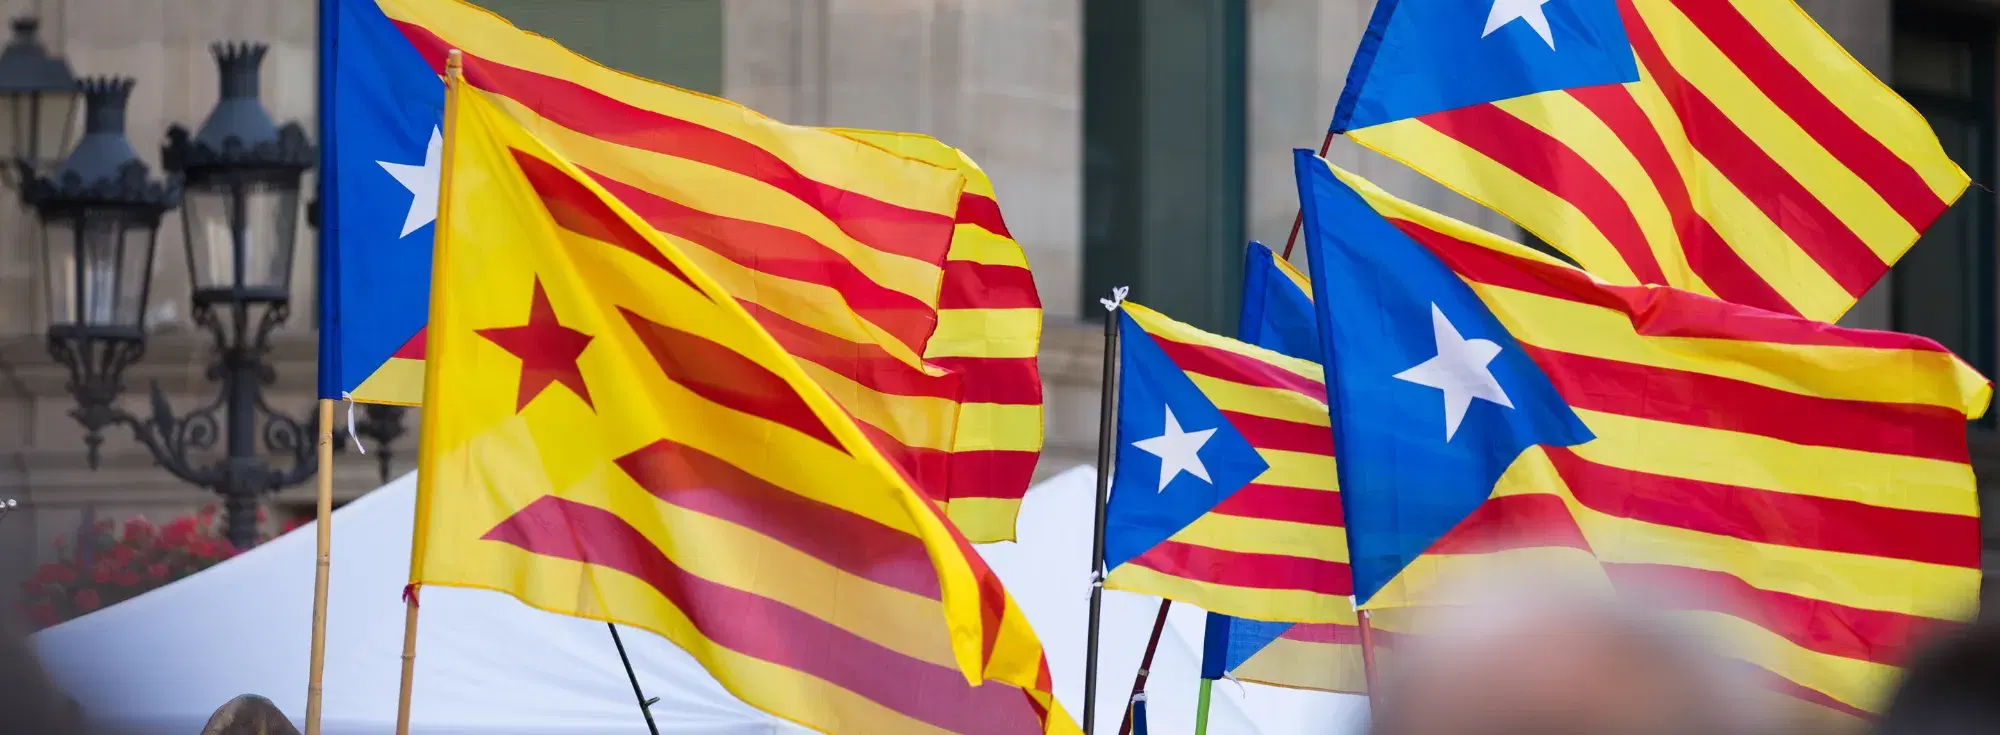 What can we learn from Catalonia’s declaration of independence?